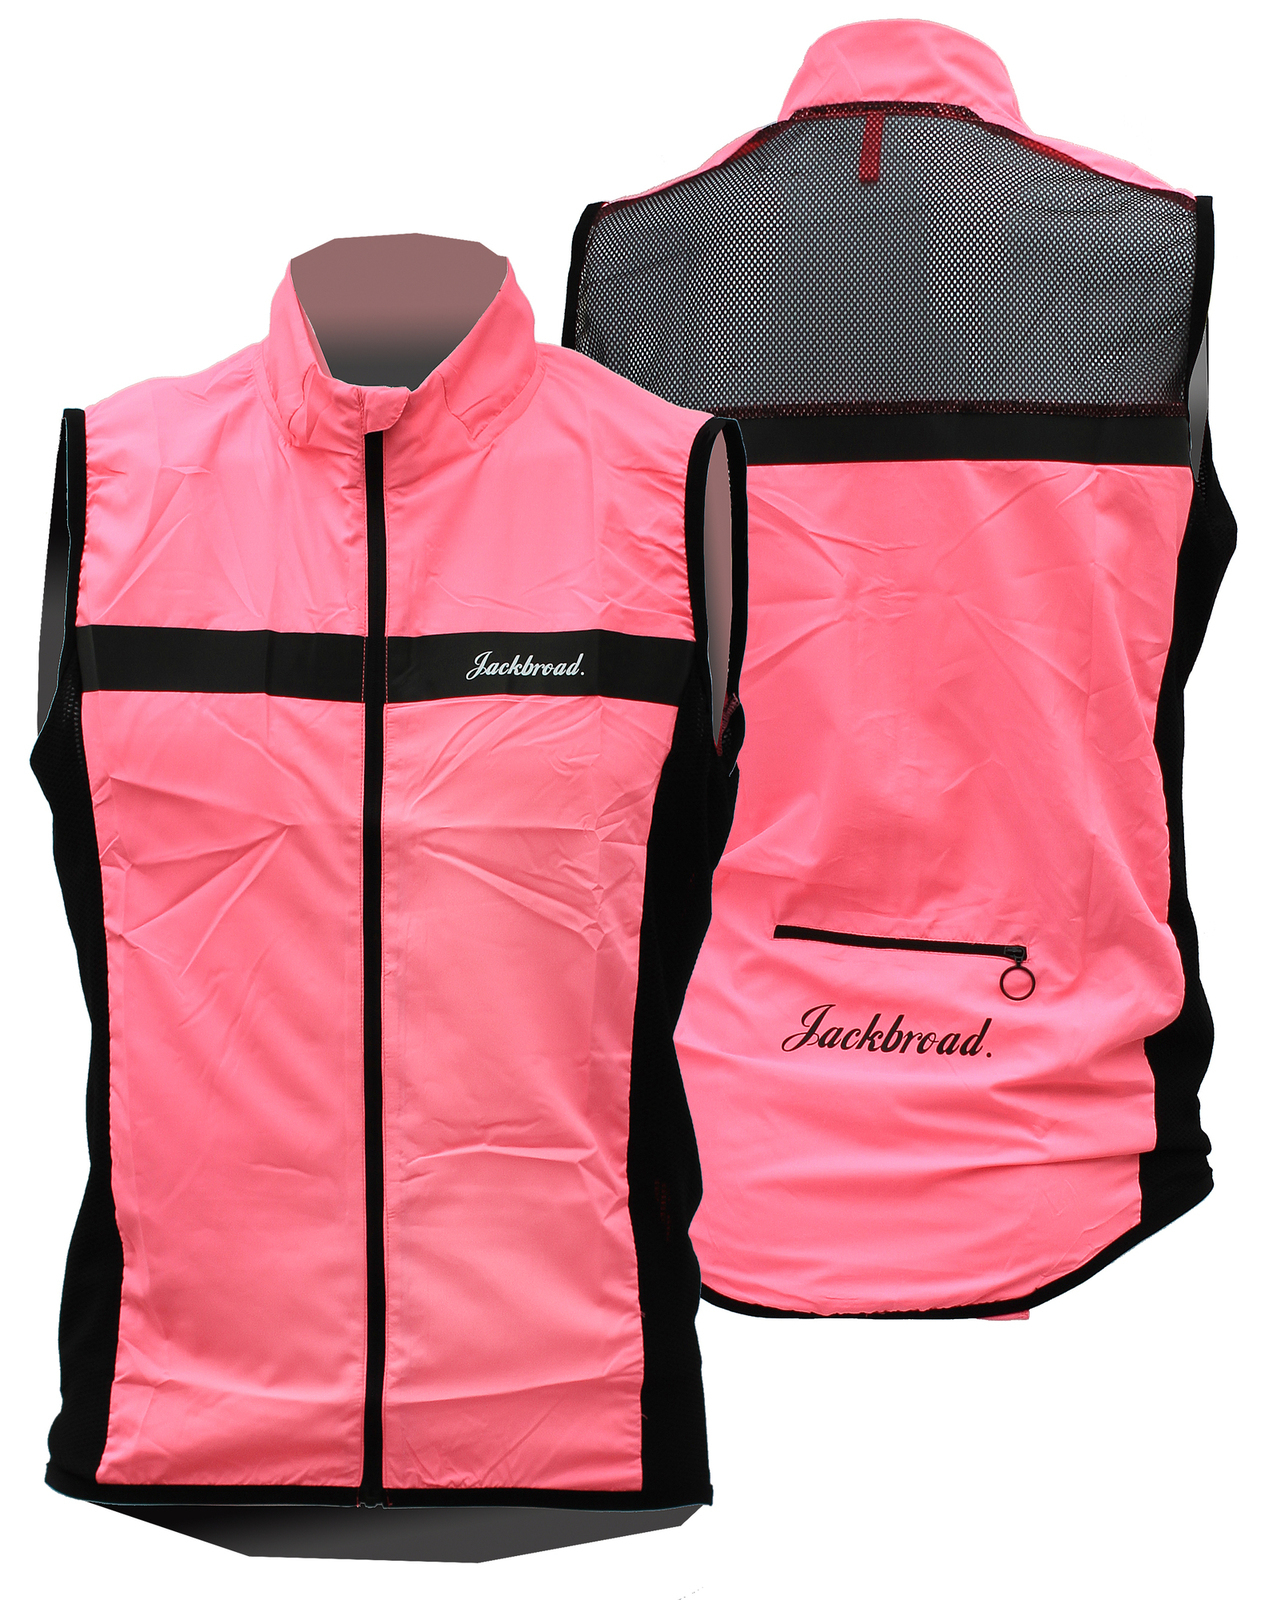 Cycling Bicycle Bike Outdoor Sleeveless Jersey Wind Vest Pink SB9322